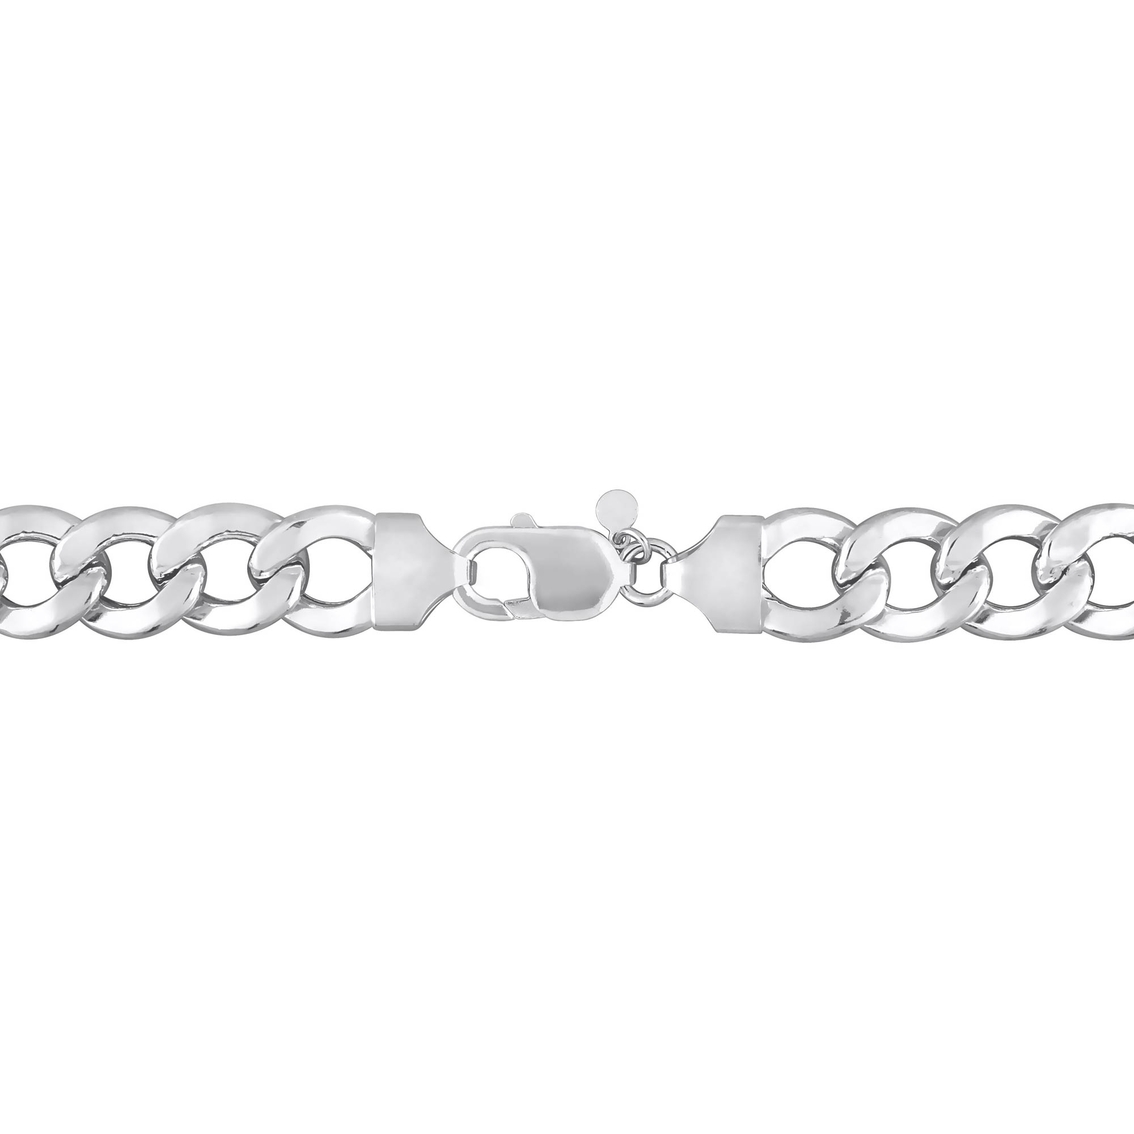 Sofia B. Sterling Silver 12.5mm Curb Link Chain Necklace - Image 2 of 4